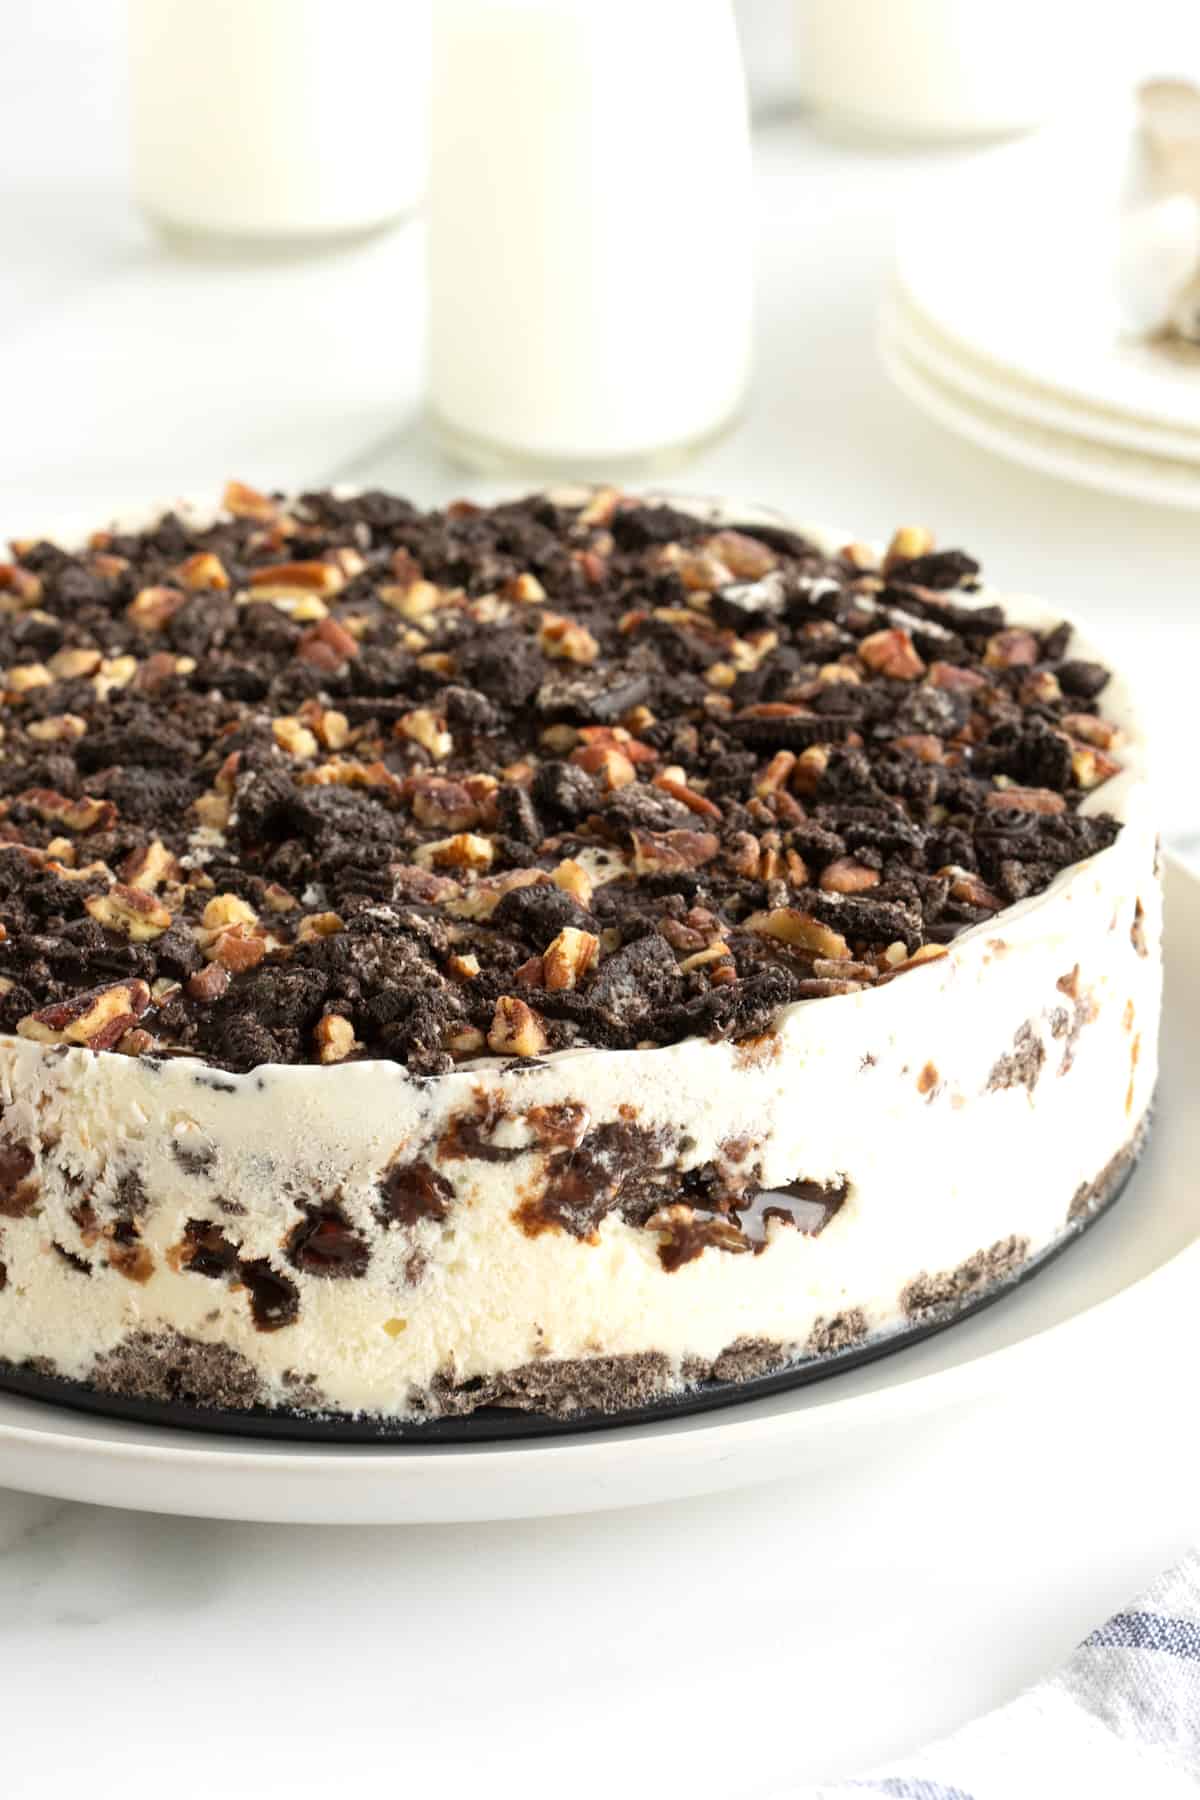 An Oreo ice cream pie on a white serving platter.